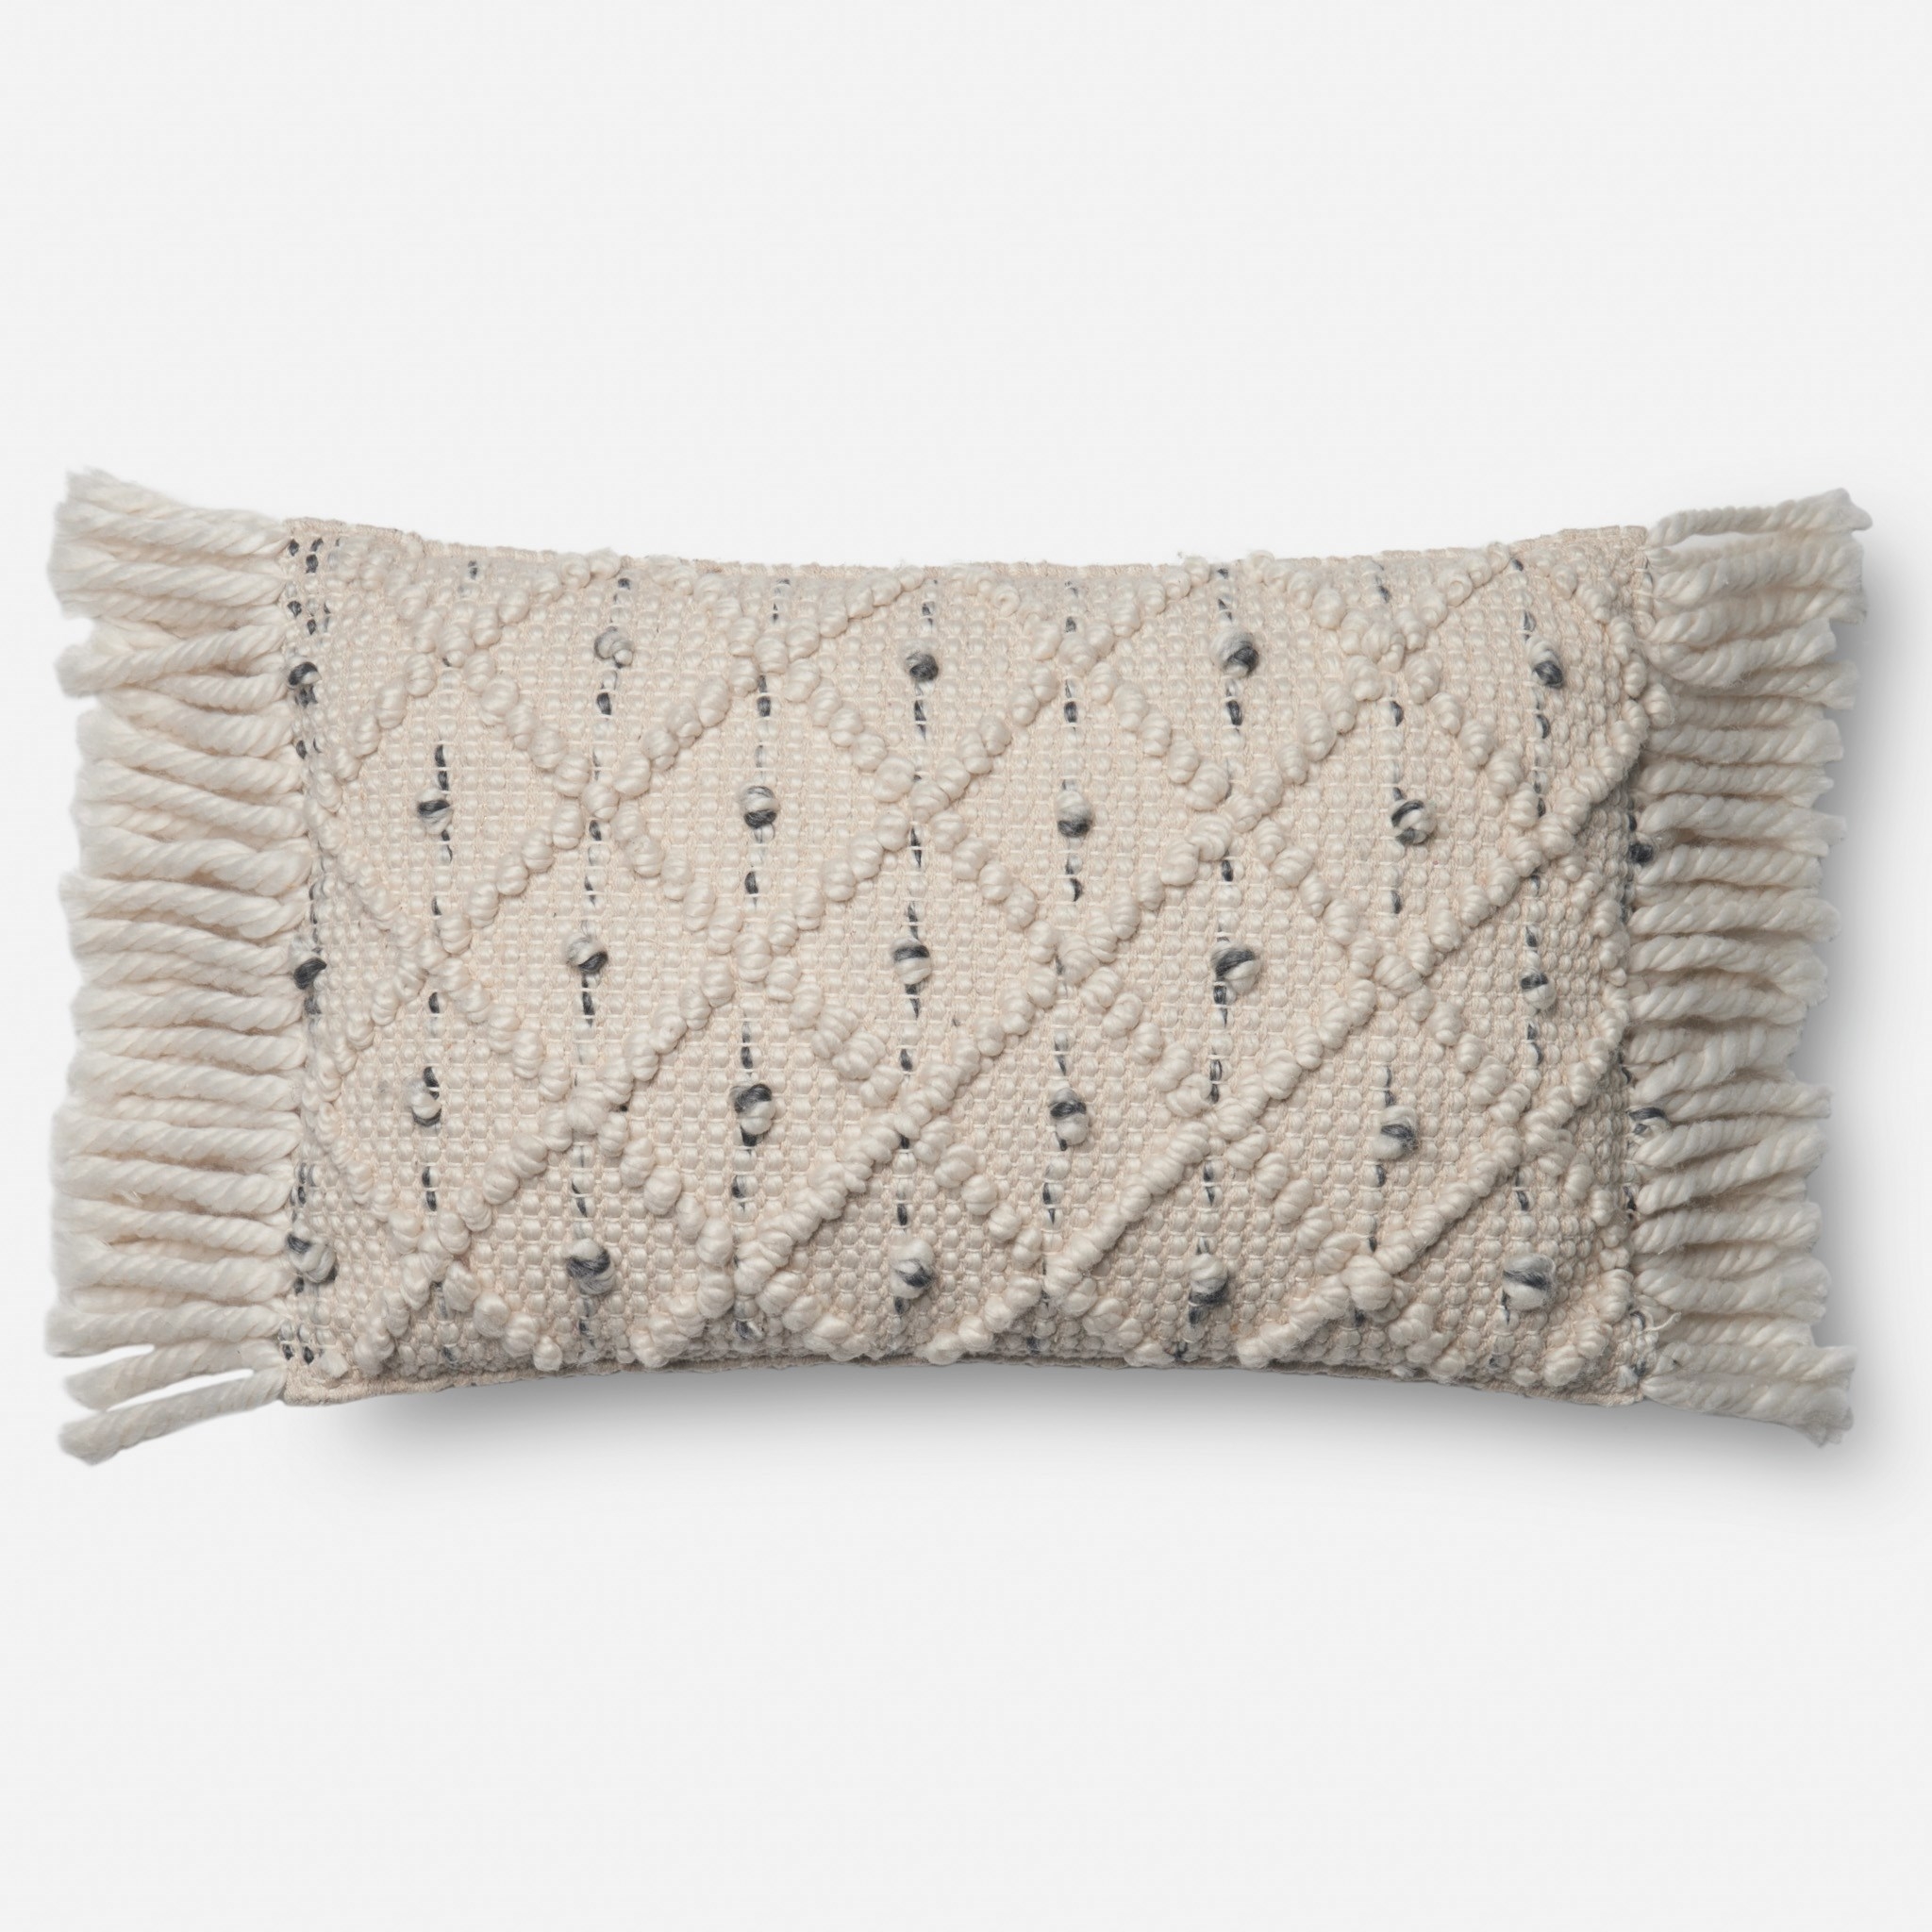 PILLOWS - IVORY / BLACK 13x21 cover - Image 0